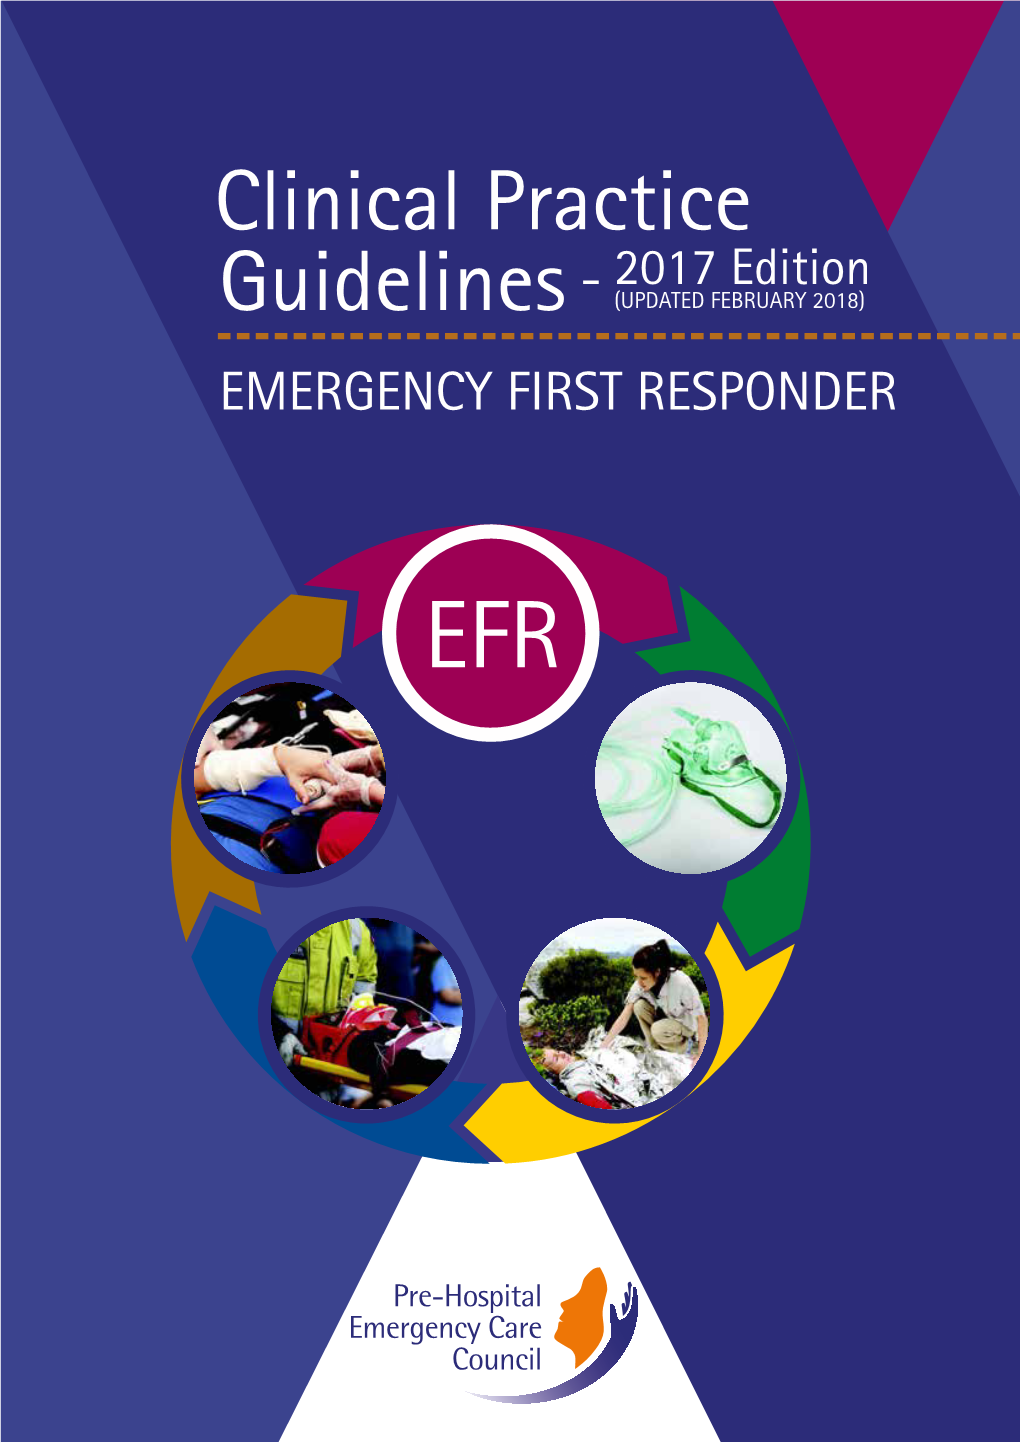 Guidelines CLINICAL PRACTICE GUIDELINES Forfor EMERGENCY FIRST RESPONDER (CODES EXPLANATION) Emergency First Response Codes Explanation